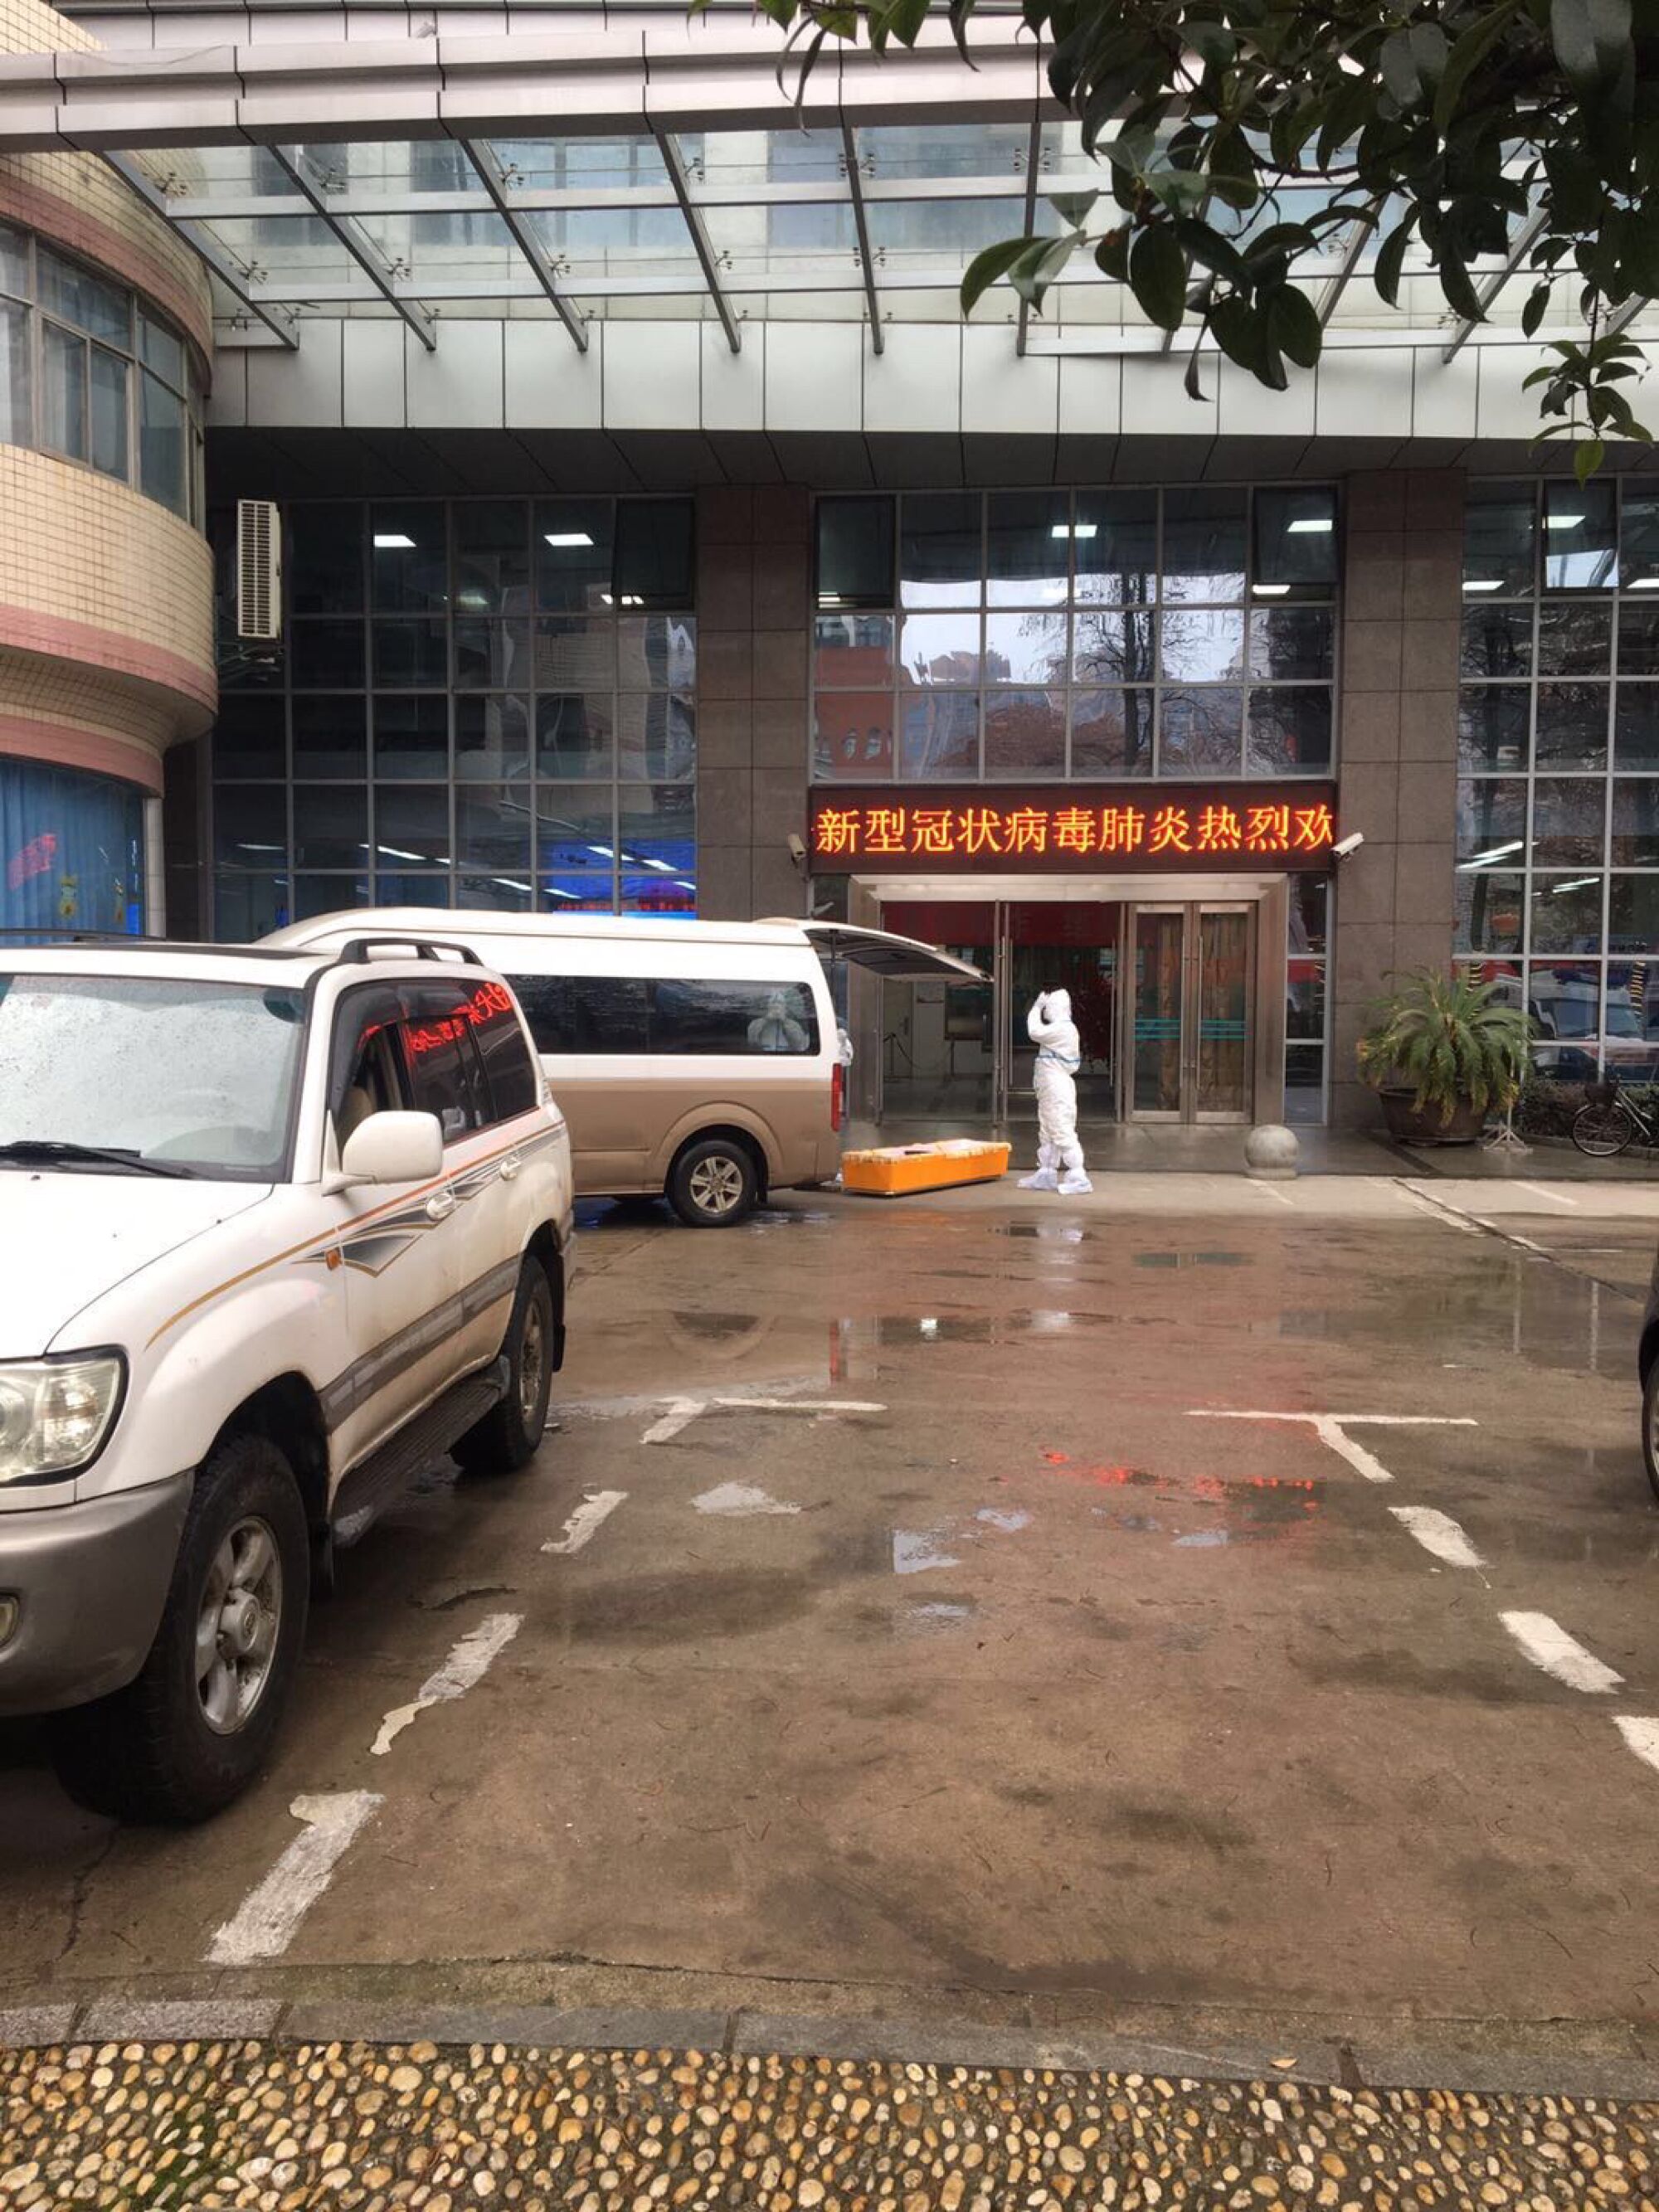 Mr. Yang sat in his car in front of a hospital, watching funeral workers load corpses into vehicles to be cremated. Every body was another empty bed and chance for his father's survival.